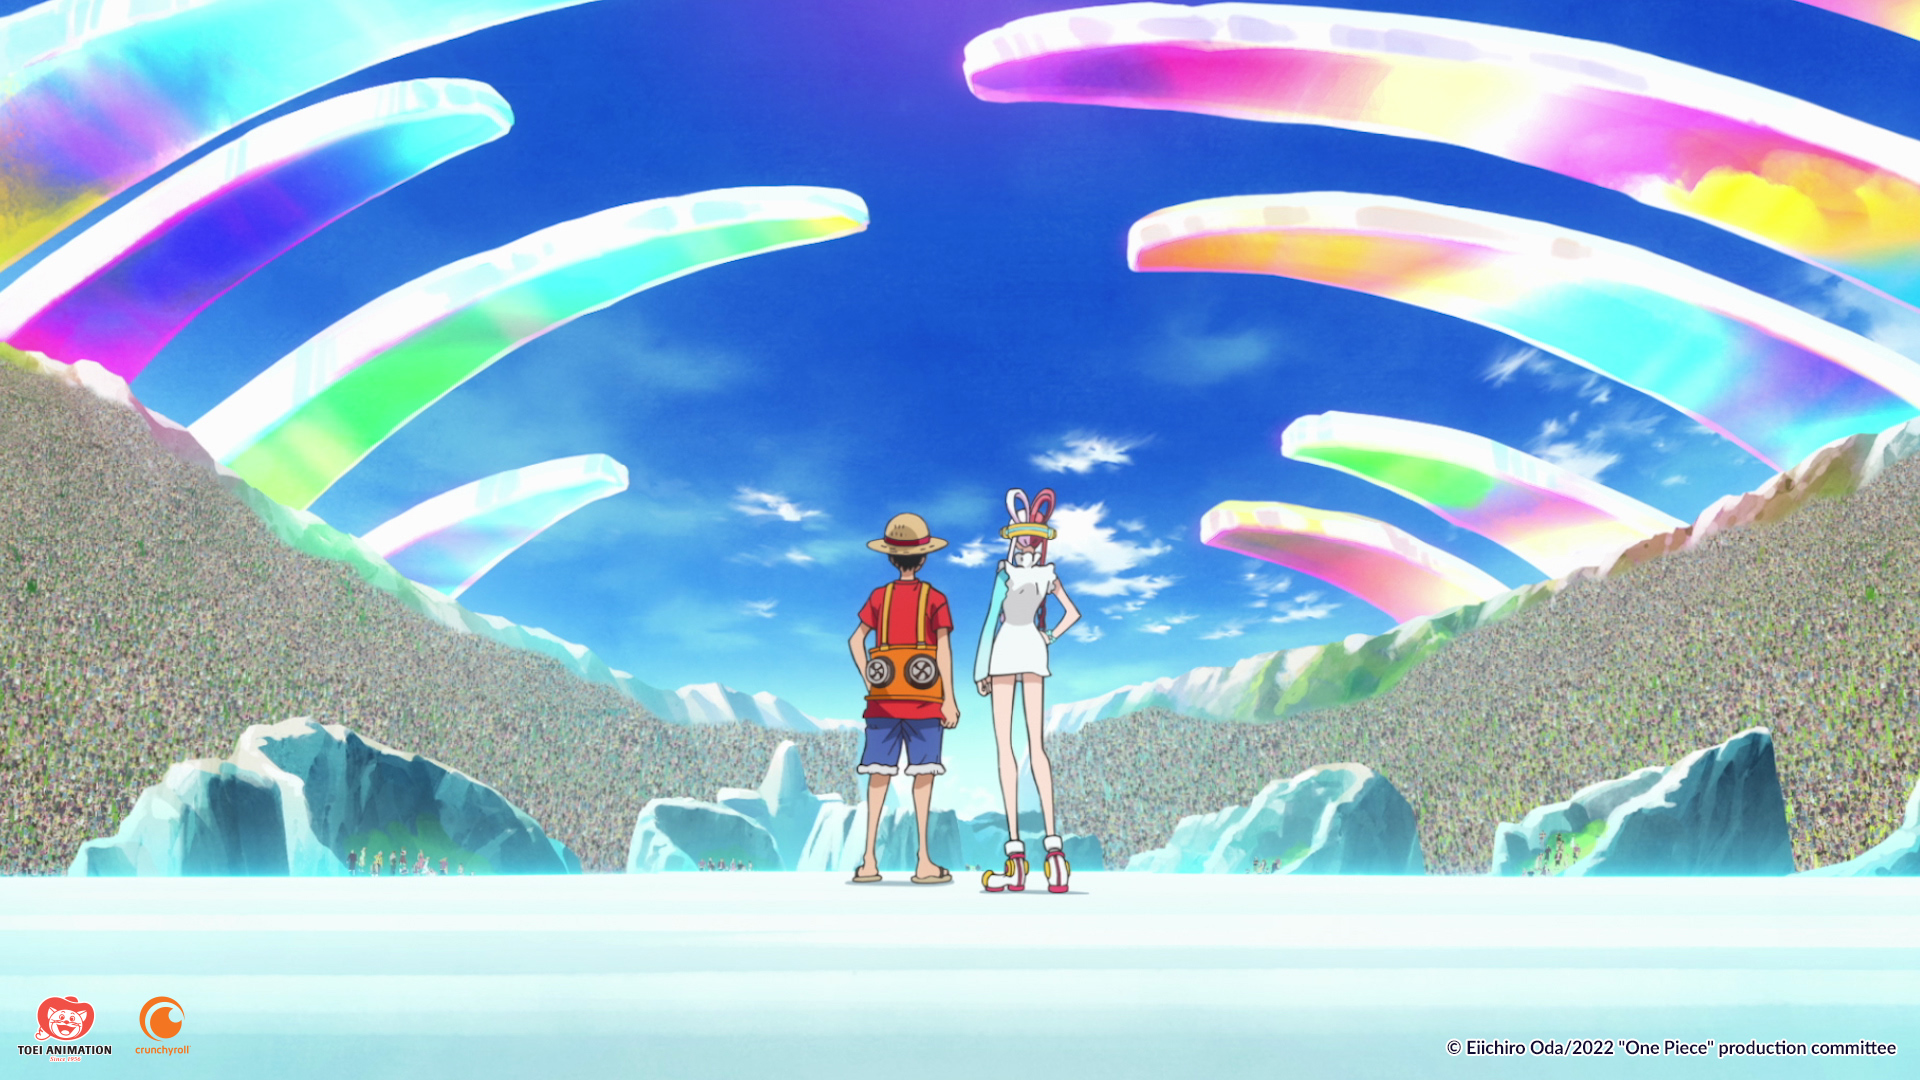 A still from 'One Piece Film Red' for our article about its U.S. release. It shows Monkey D. Luffy and Uta with their backs turned, staring up at colorful ice.